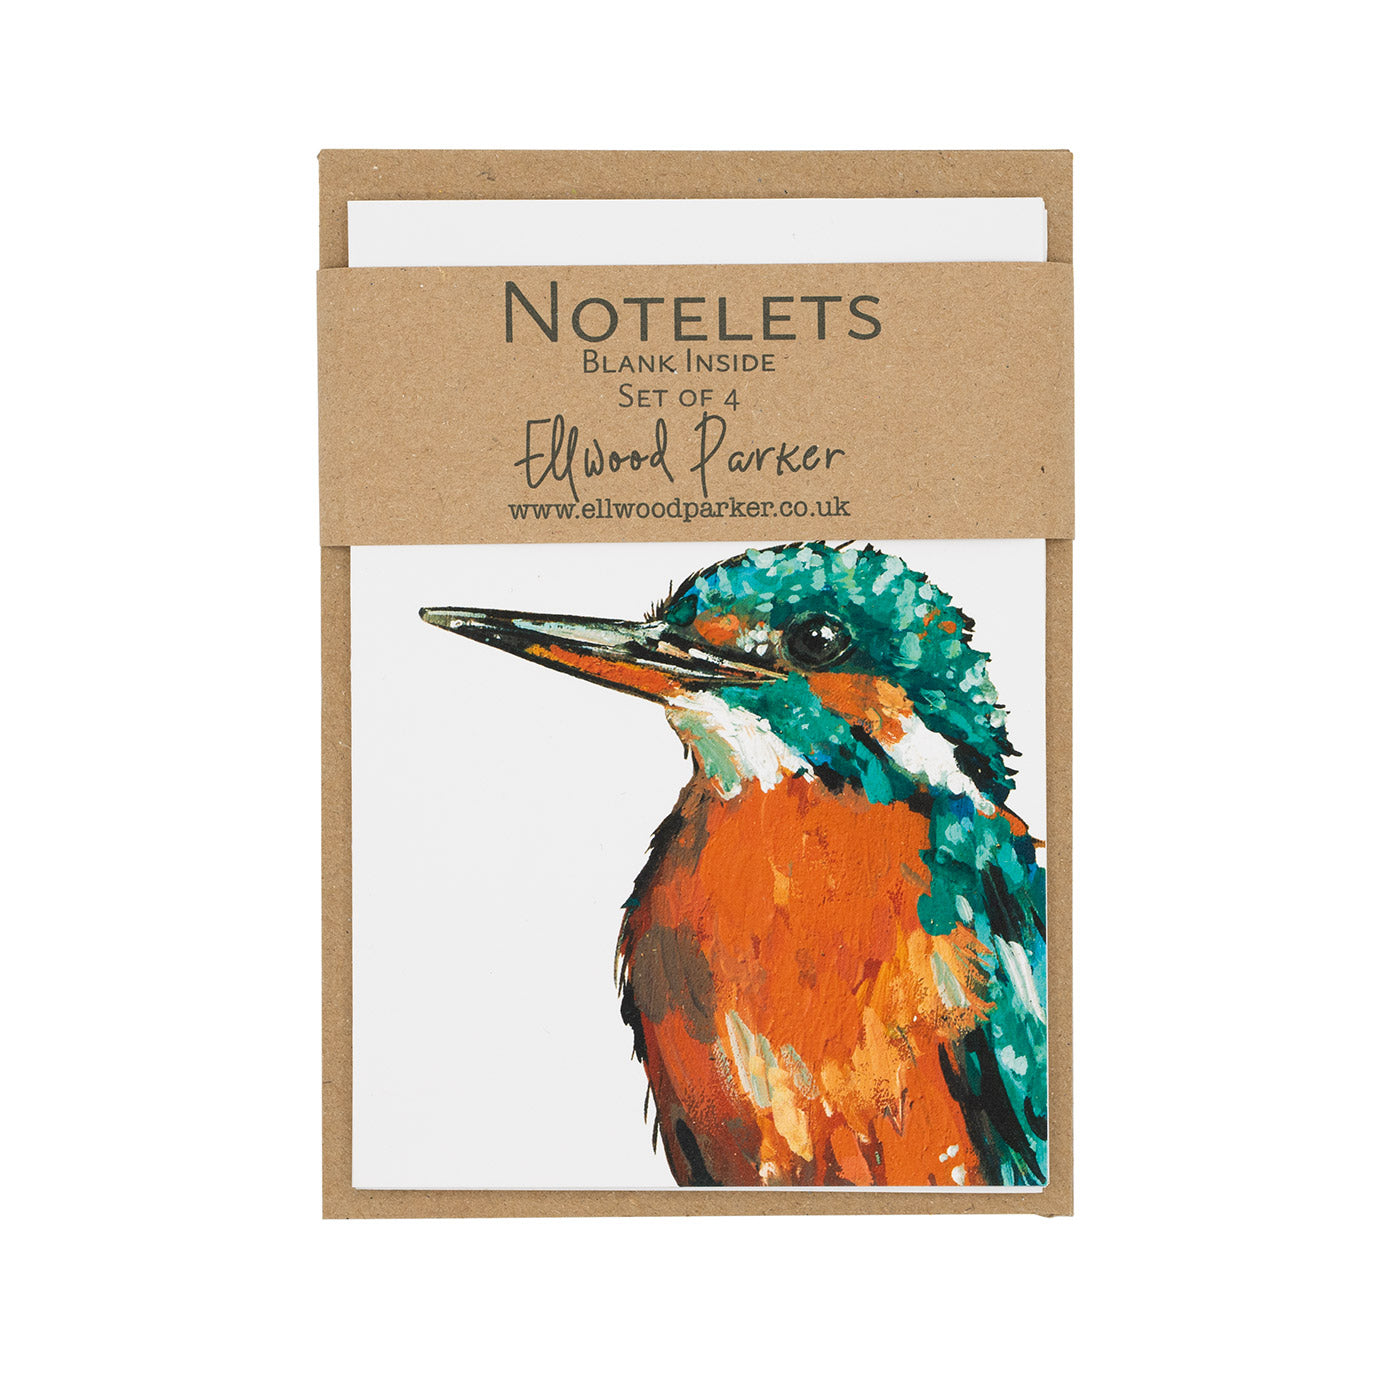 Set of Cards with an illustraion of a Kingfisher.